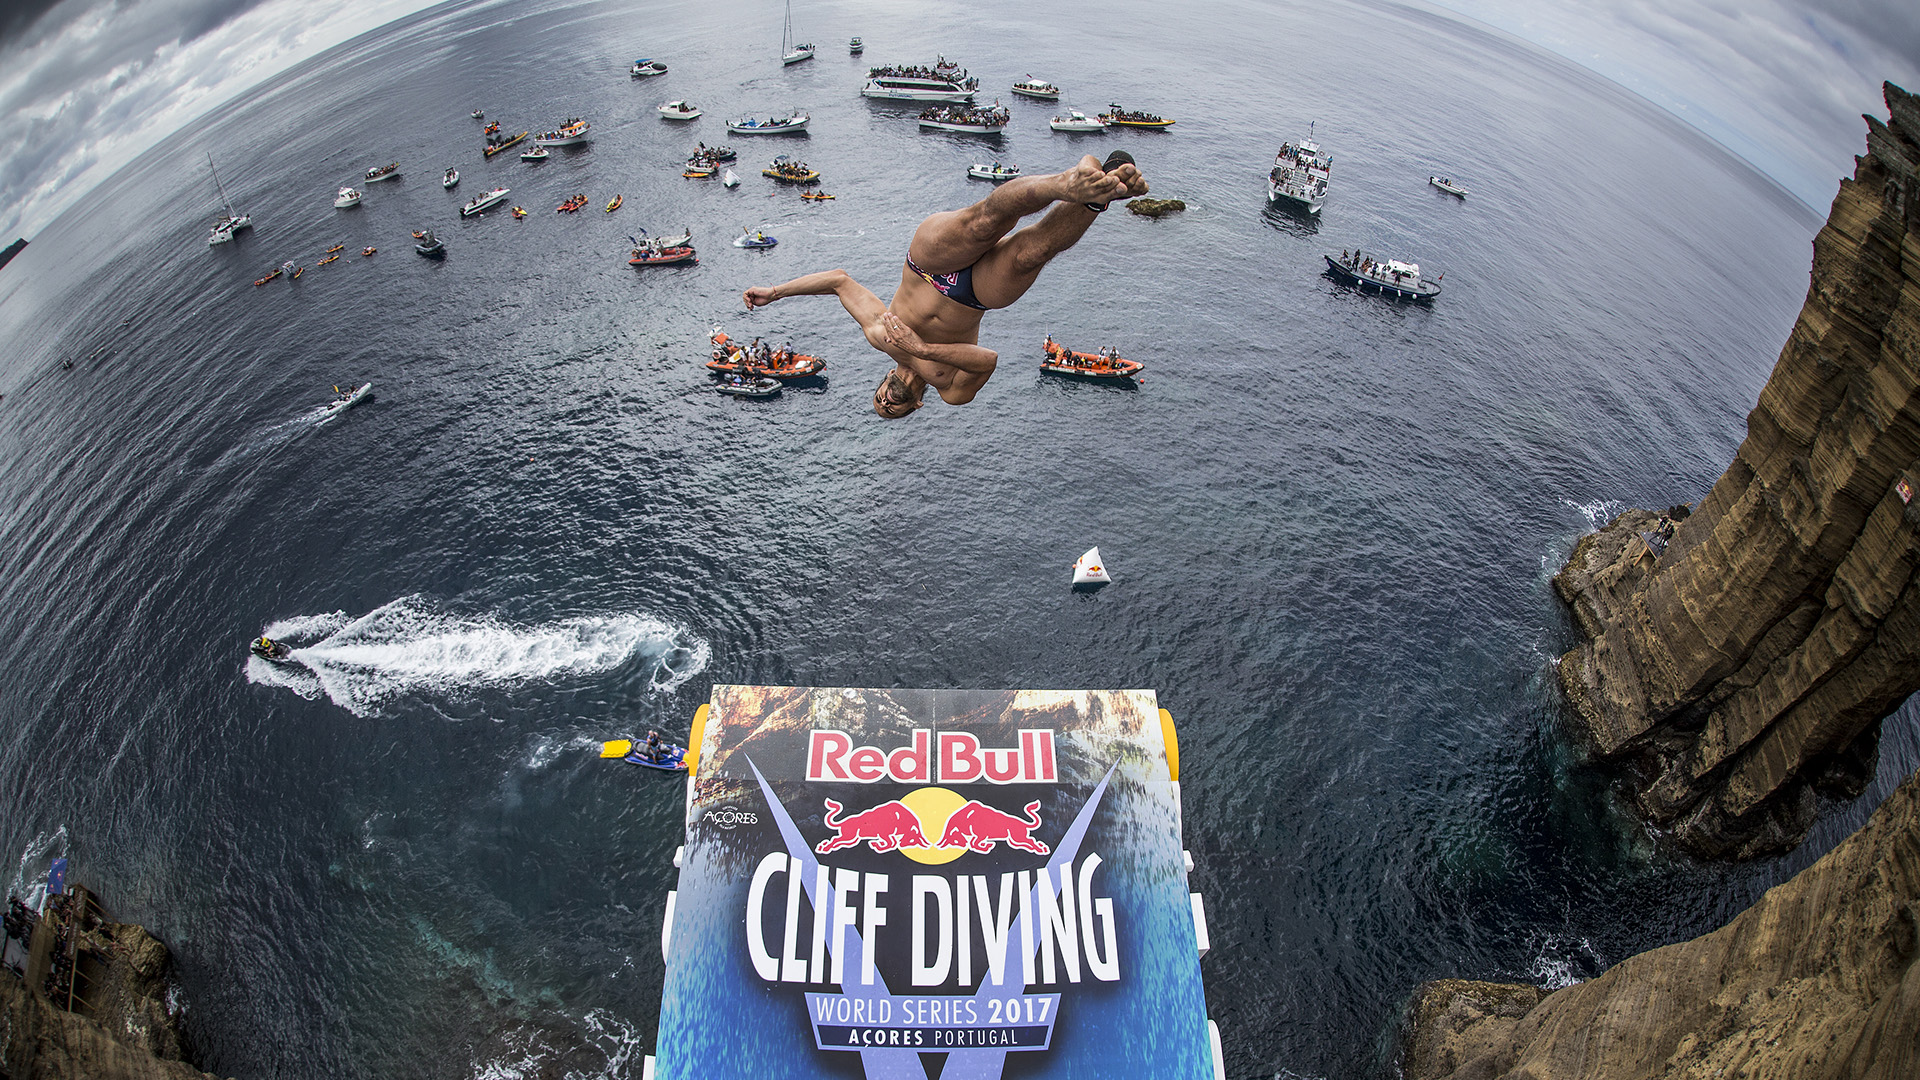 RED BULL CLIFF DIVING Extreme Events & Services